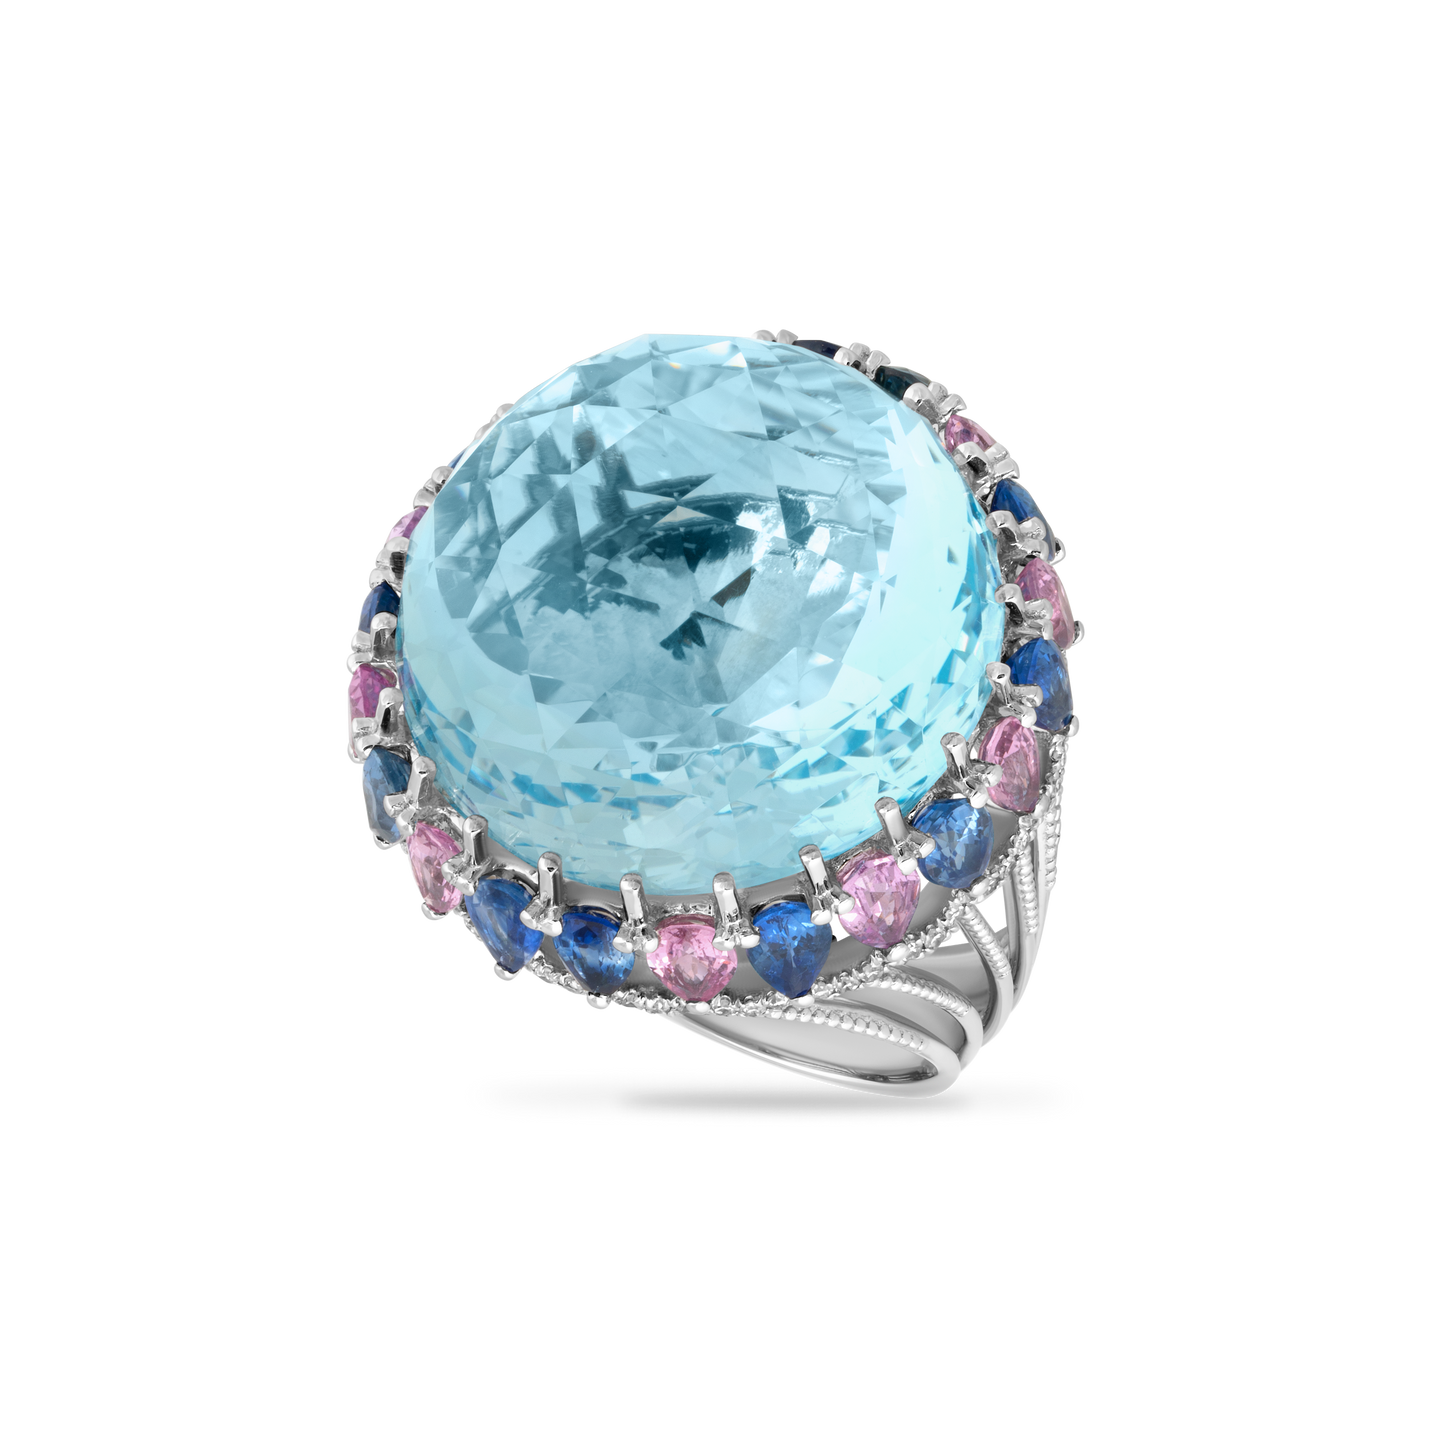 14K RING WITH 88 DIAMONDS 0.25CT, 10 PINK SAPPHIRES 1.90CT, 1 BLUE TOPAZ 46.32CT AND 12 FANCY SAPPHIRES 2.53CT